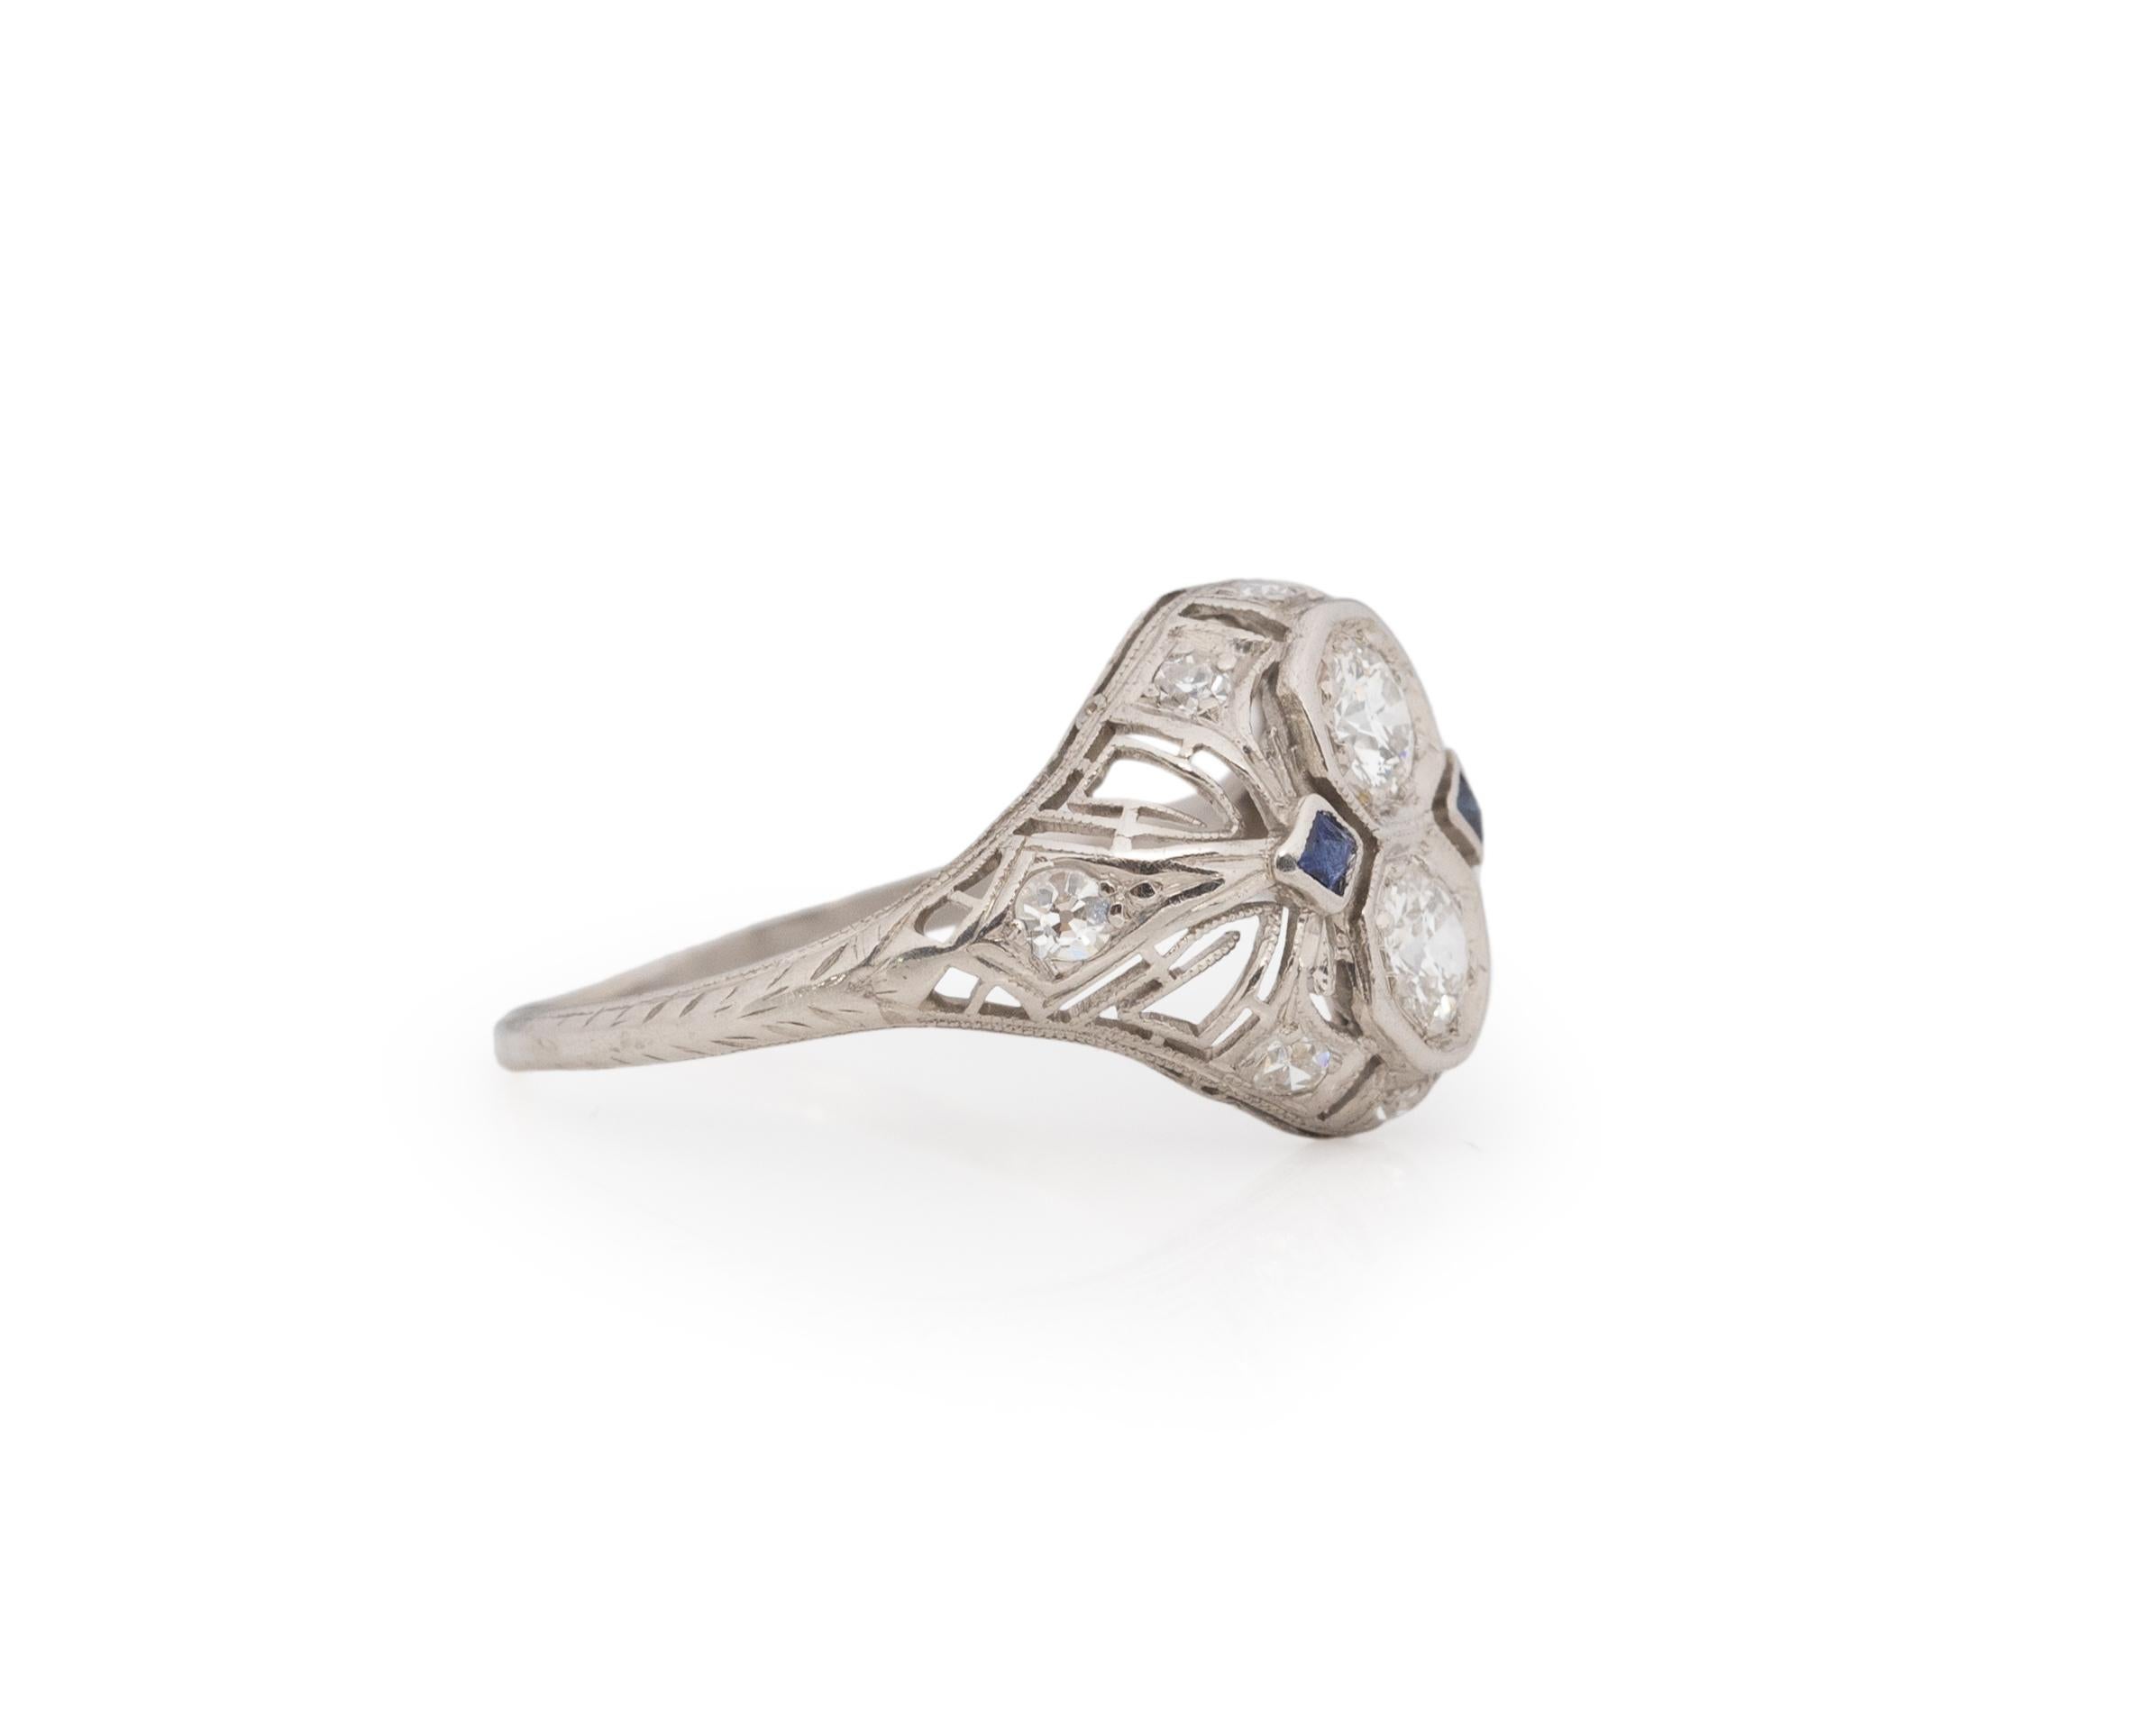 Ring Size: 7.5
Metal Type: Platinum [Hallmarked, and Tested]
Weight: 2.8 grams

Diamond Details:
Weight: .40ct, total weight
Cut: Old European brilliant
Color: G
Clarity: VS

Sapphire Details:
Natural, French Cut

Finger to Top of Stone Measurement: